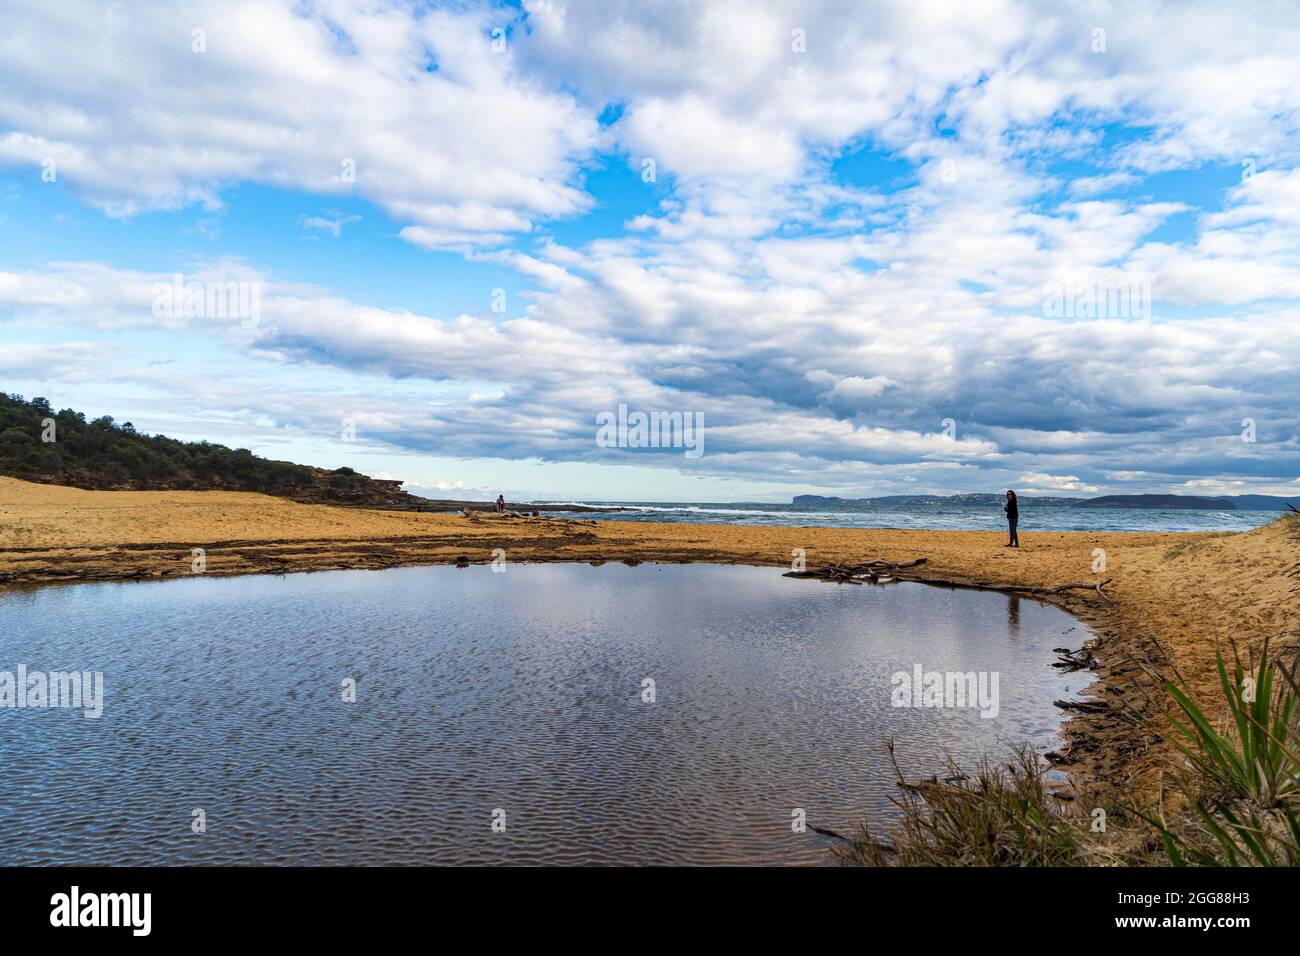 Putty Beach, Central Coast, NSW, Australia on a wild stormy day looking across the ripples of a lagoon to a solitary figure looking at the ocean Stock Photo